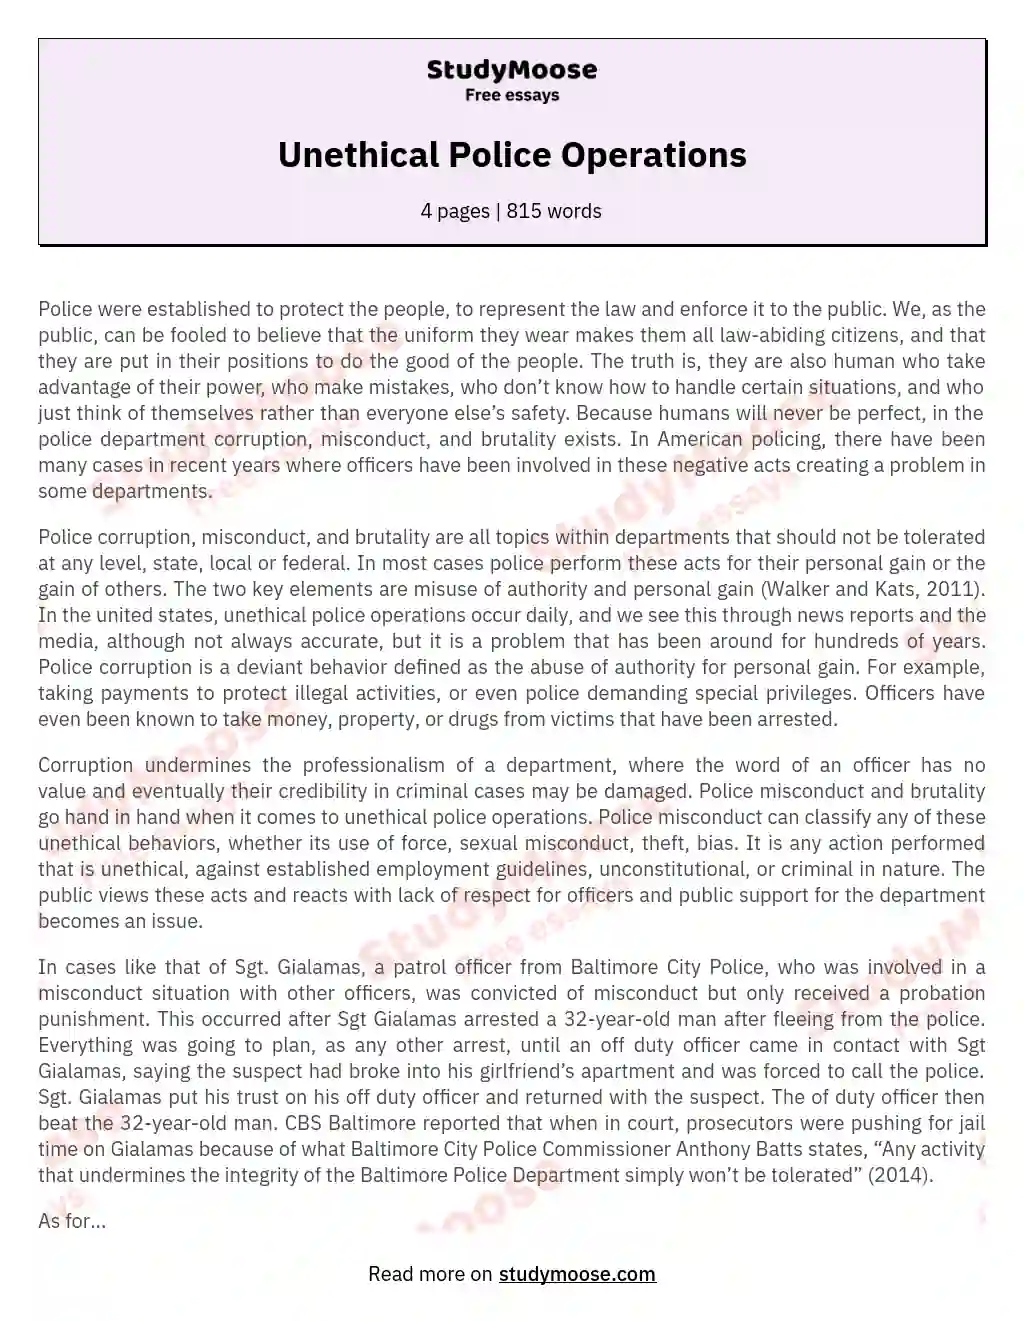 Unethical Police Operations